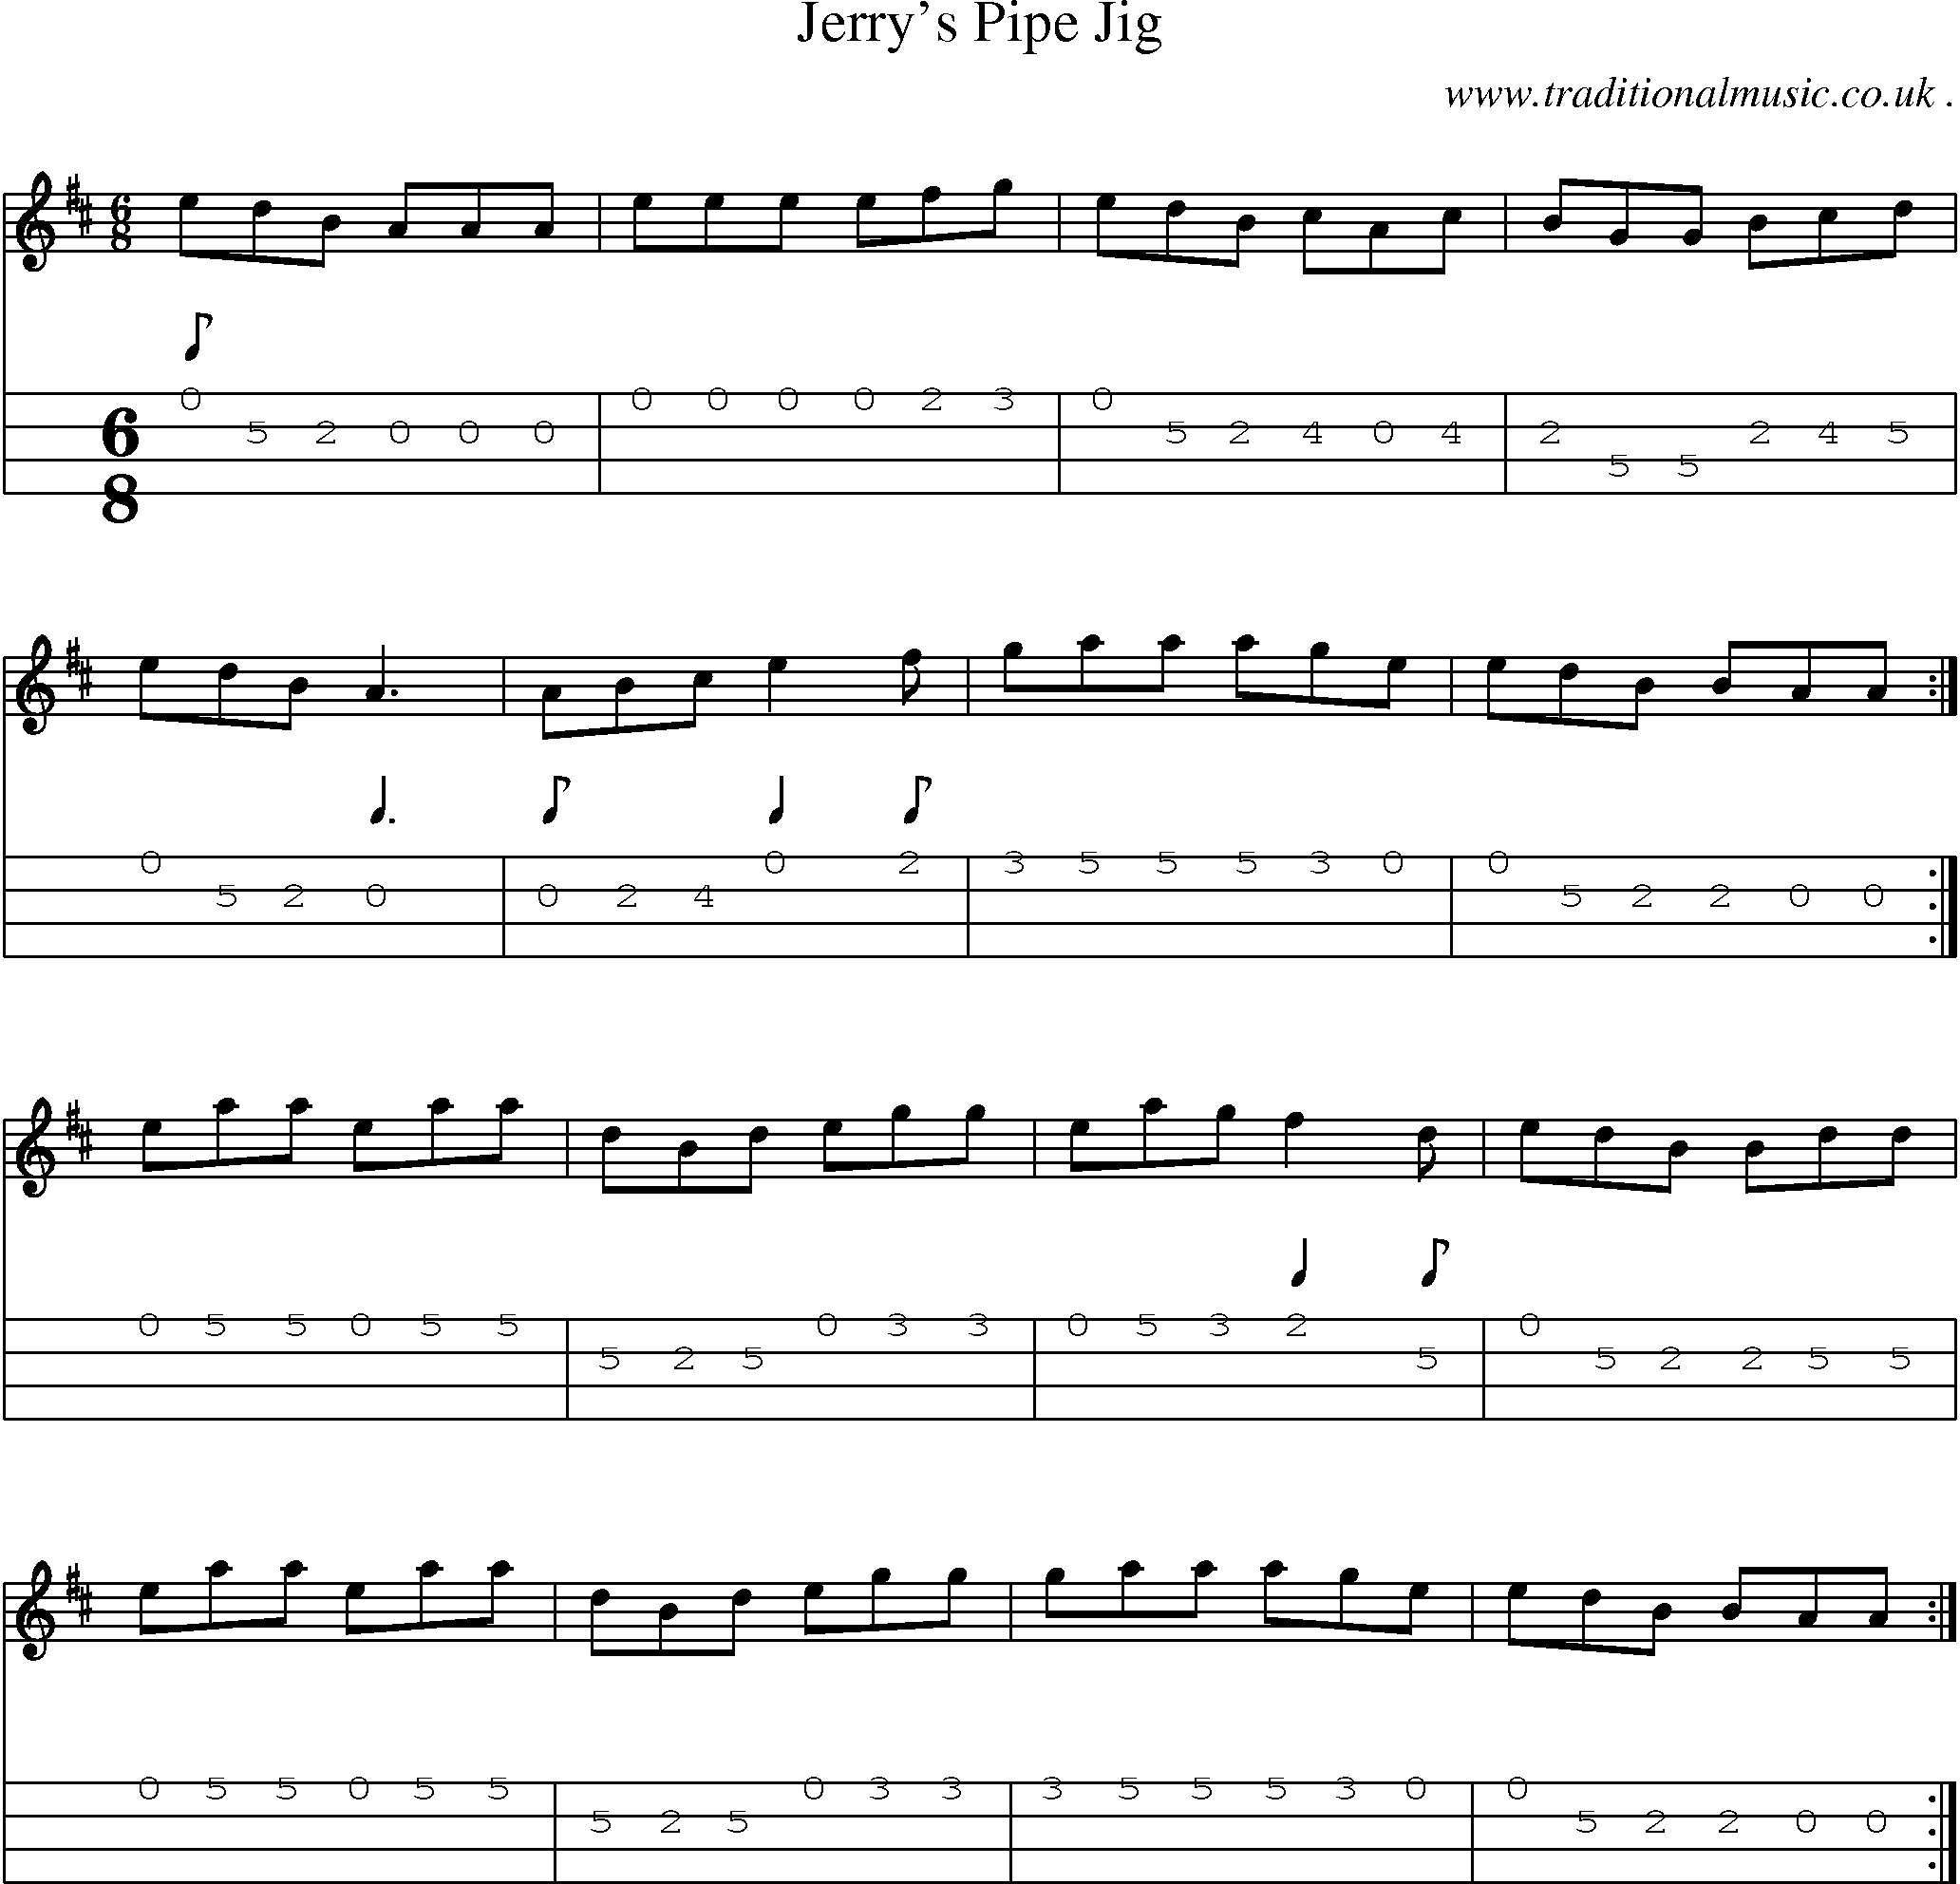 Sheet-music  score, Chords and Mandolin Tabs for Jerrys Pipe Jig